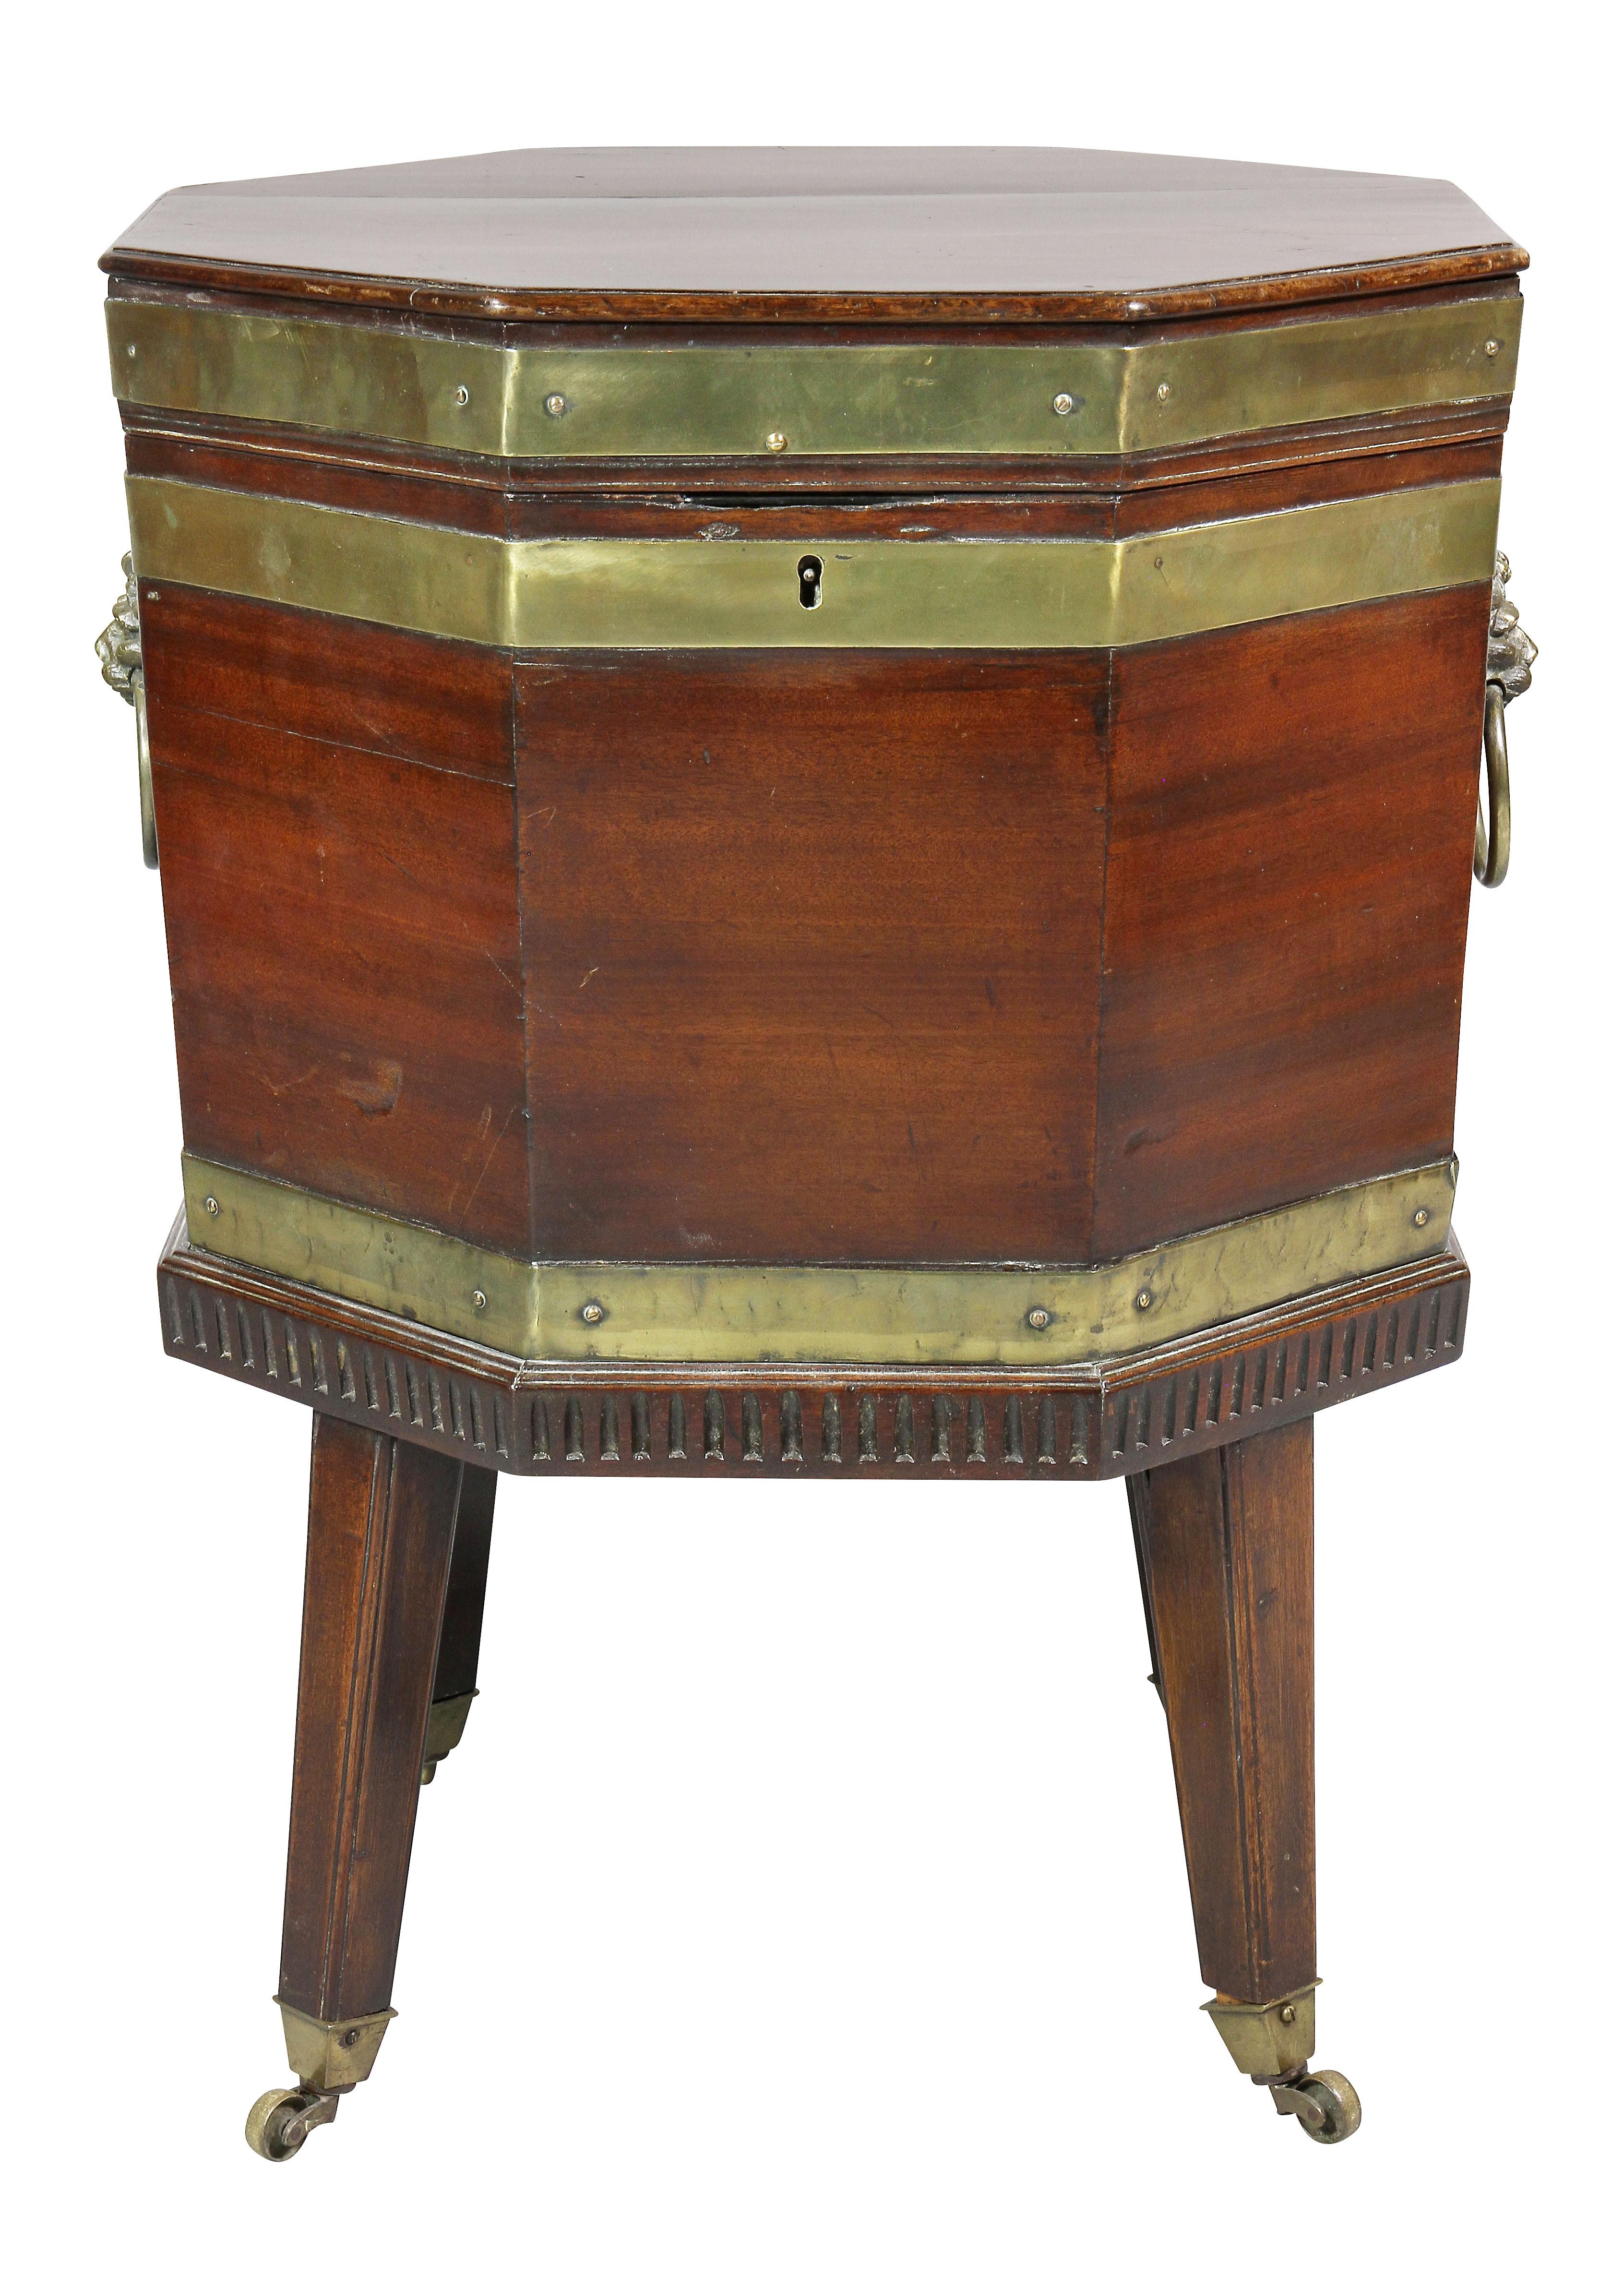 Octagonal hinged top over a conforming case with copper liner, lions head and ring handles raised on square tapered legs with casters.